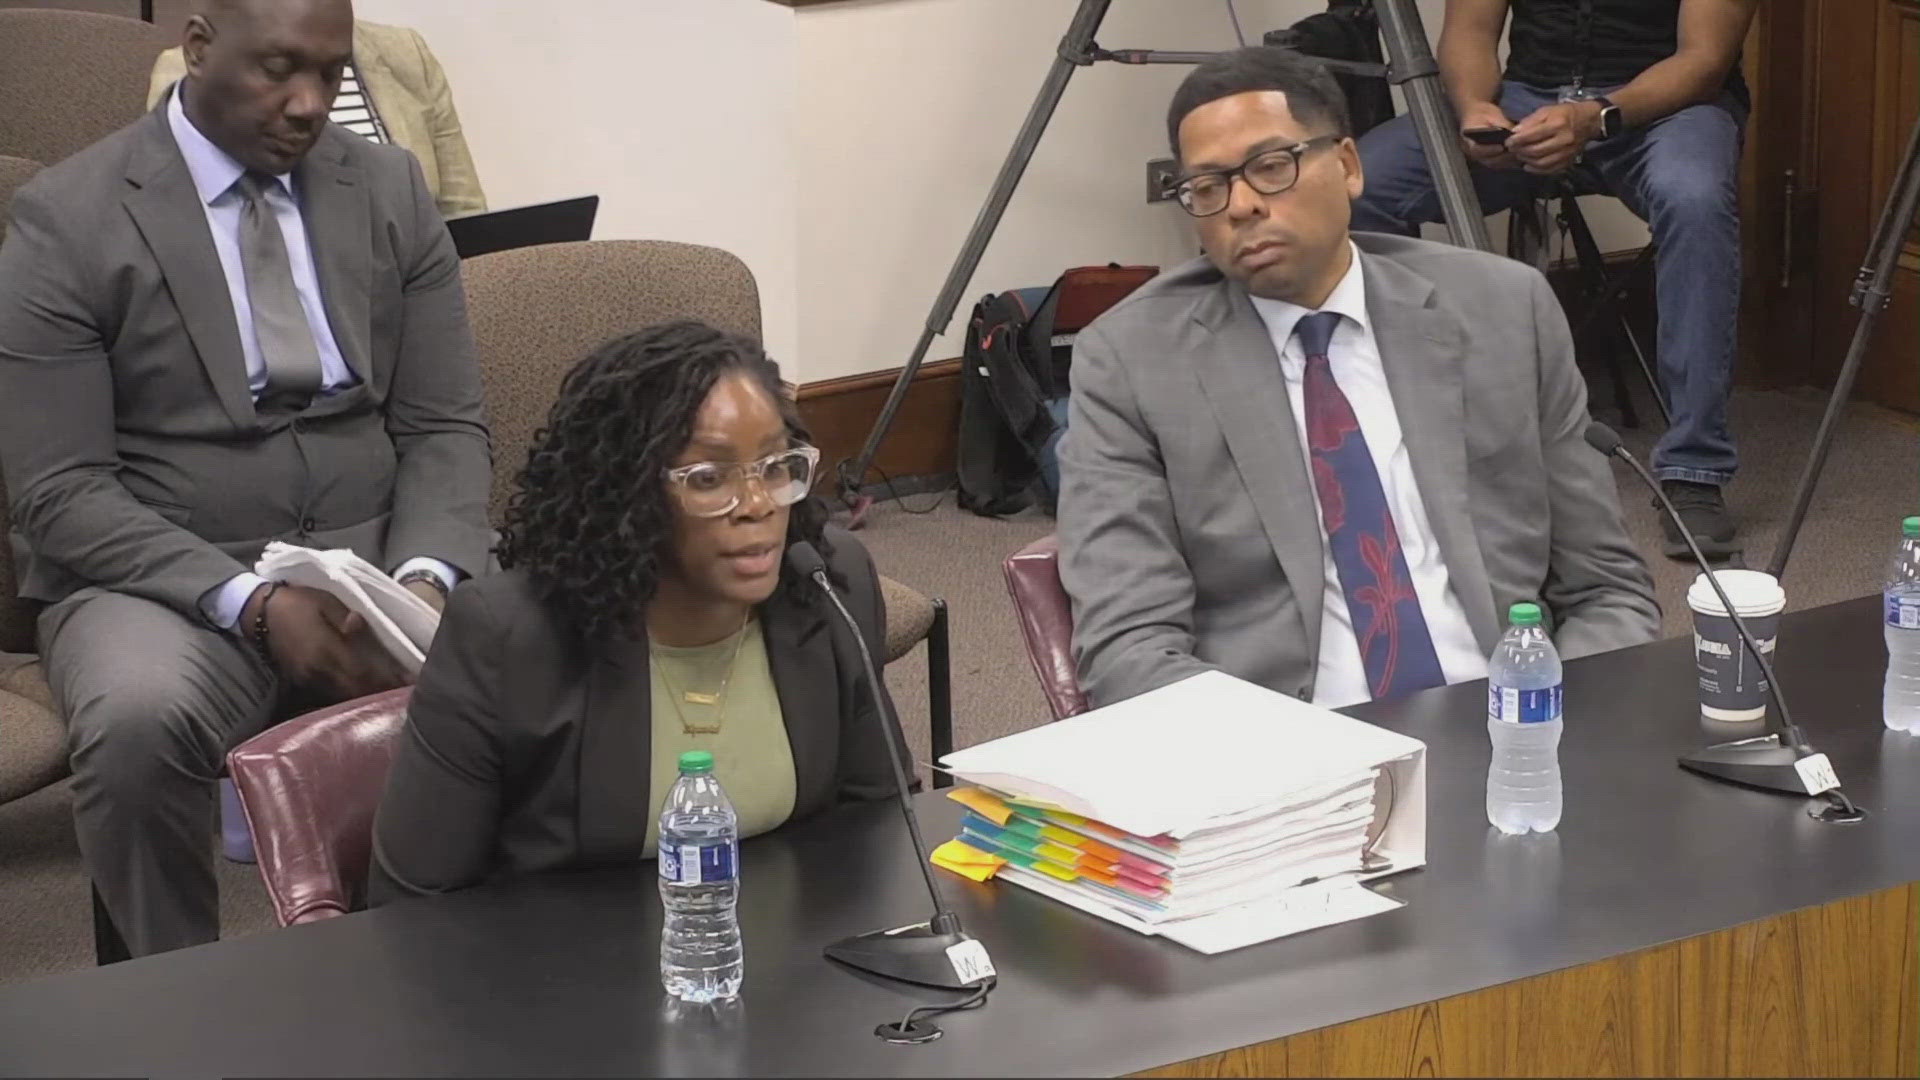 Former Director of Juvenile Diversion Amanda Timpson testified at the investigative committee hearing Thursday.